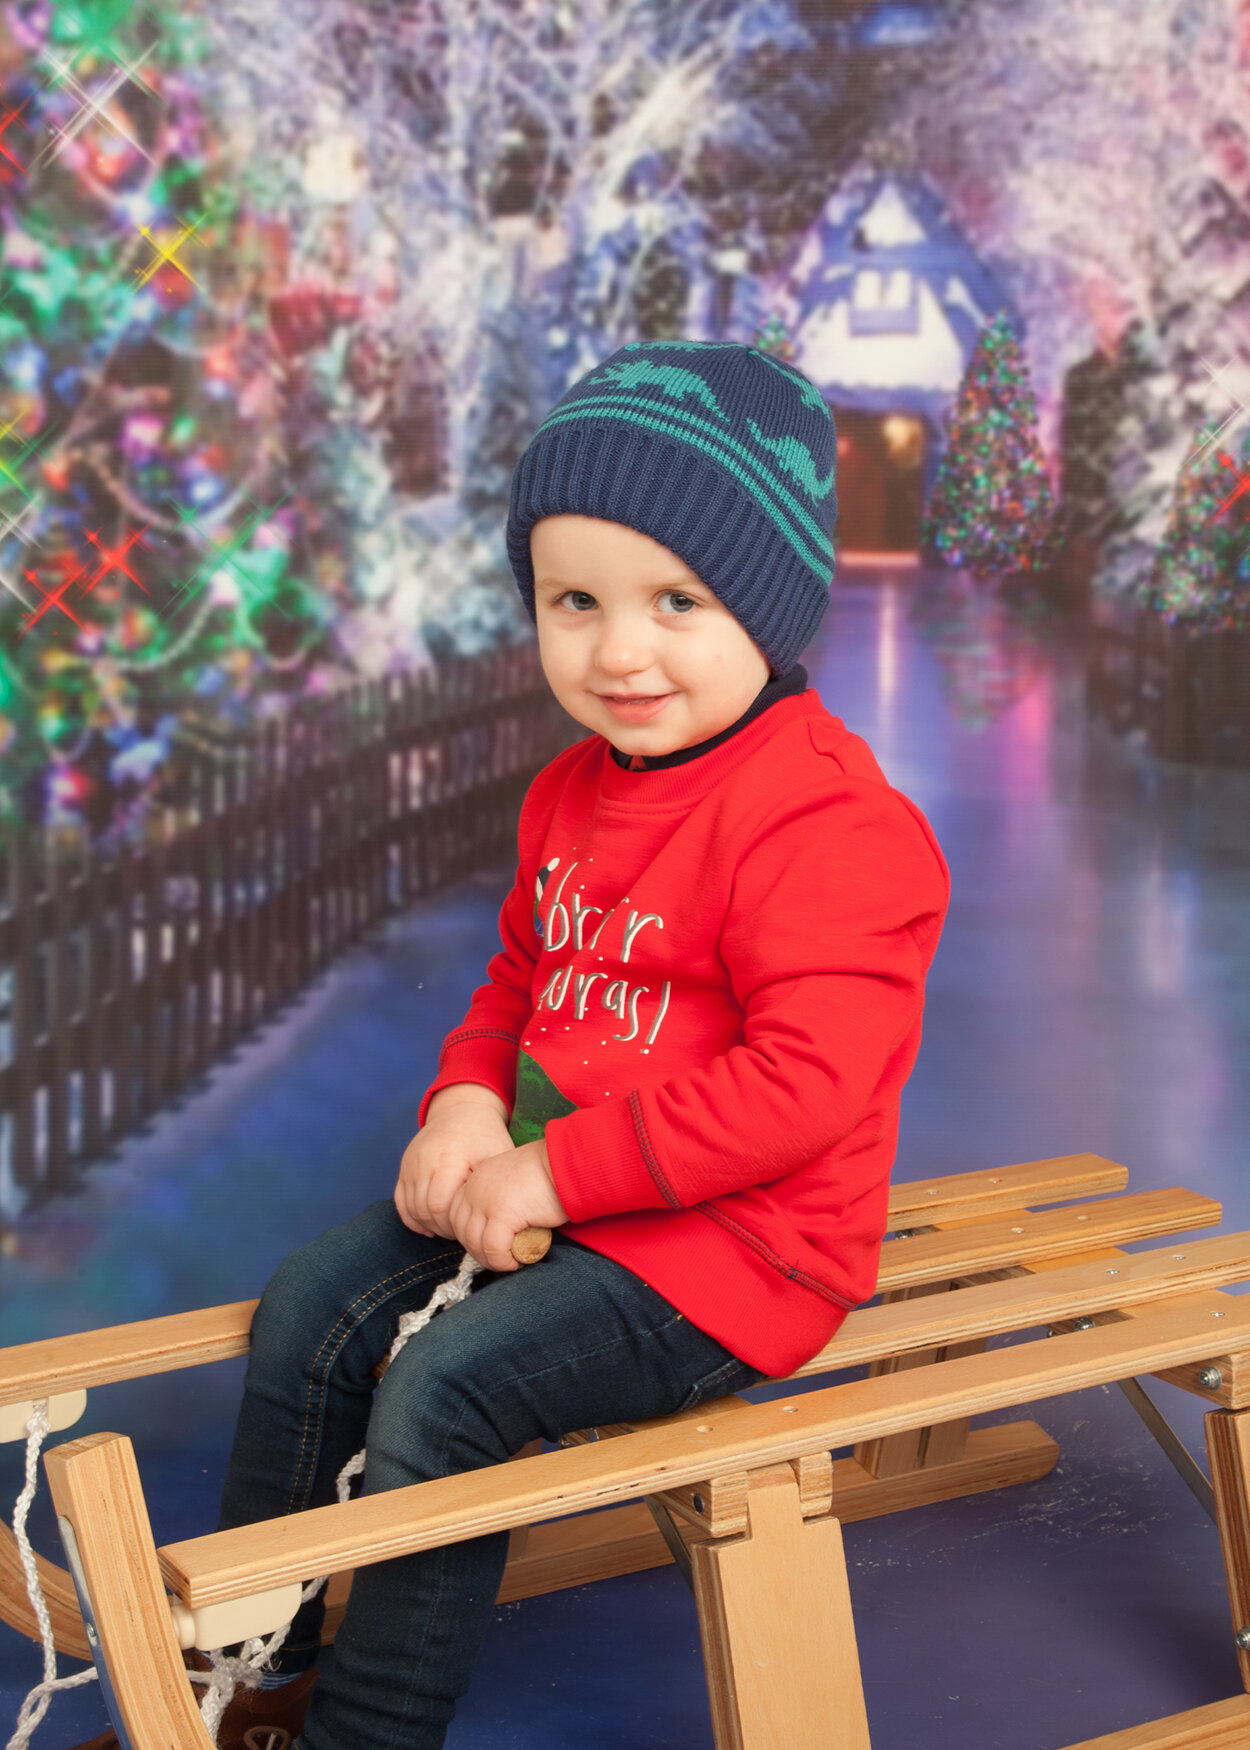 zig-zag-photography-leicester-leicestershire-nursery-photographer-school-pre-childcare-photos-themed-backdrop-kids-children-christmas